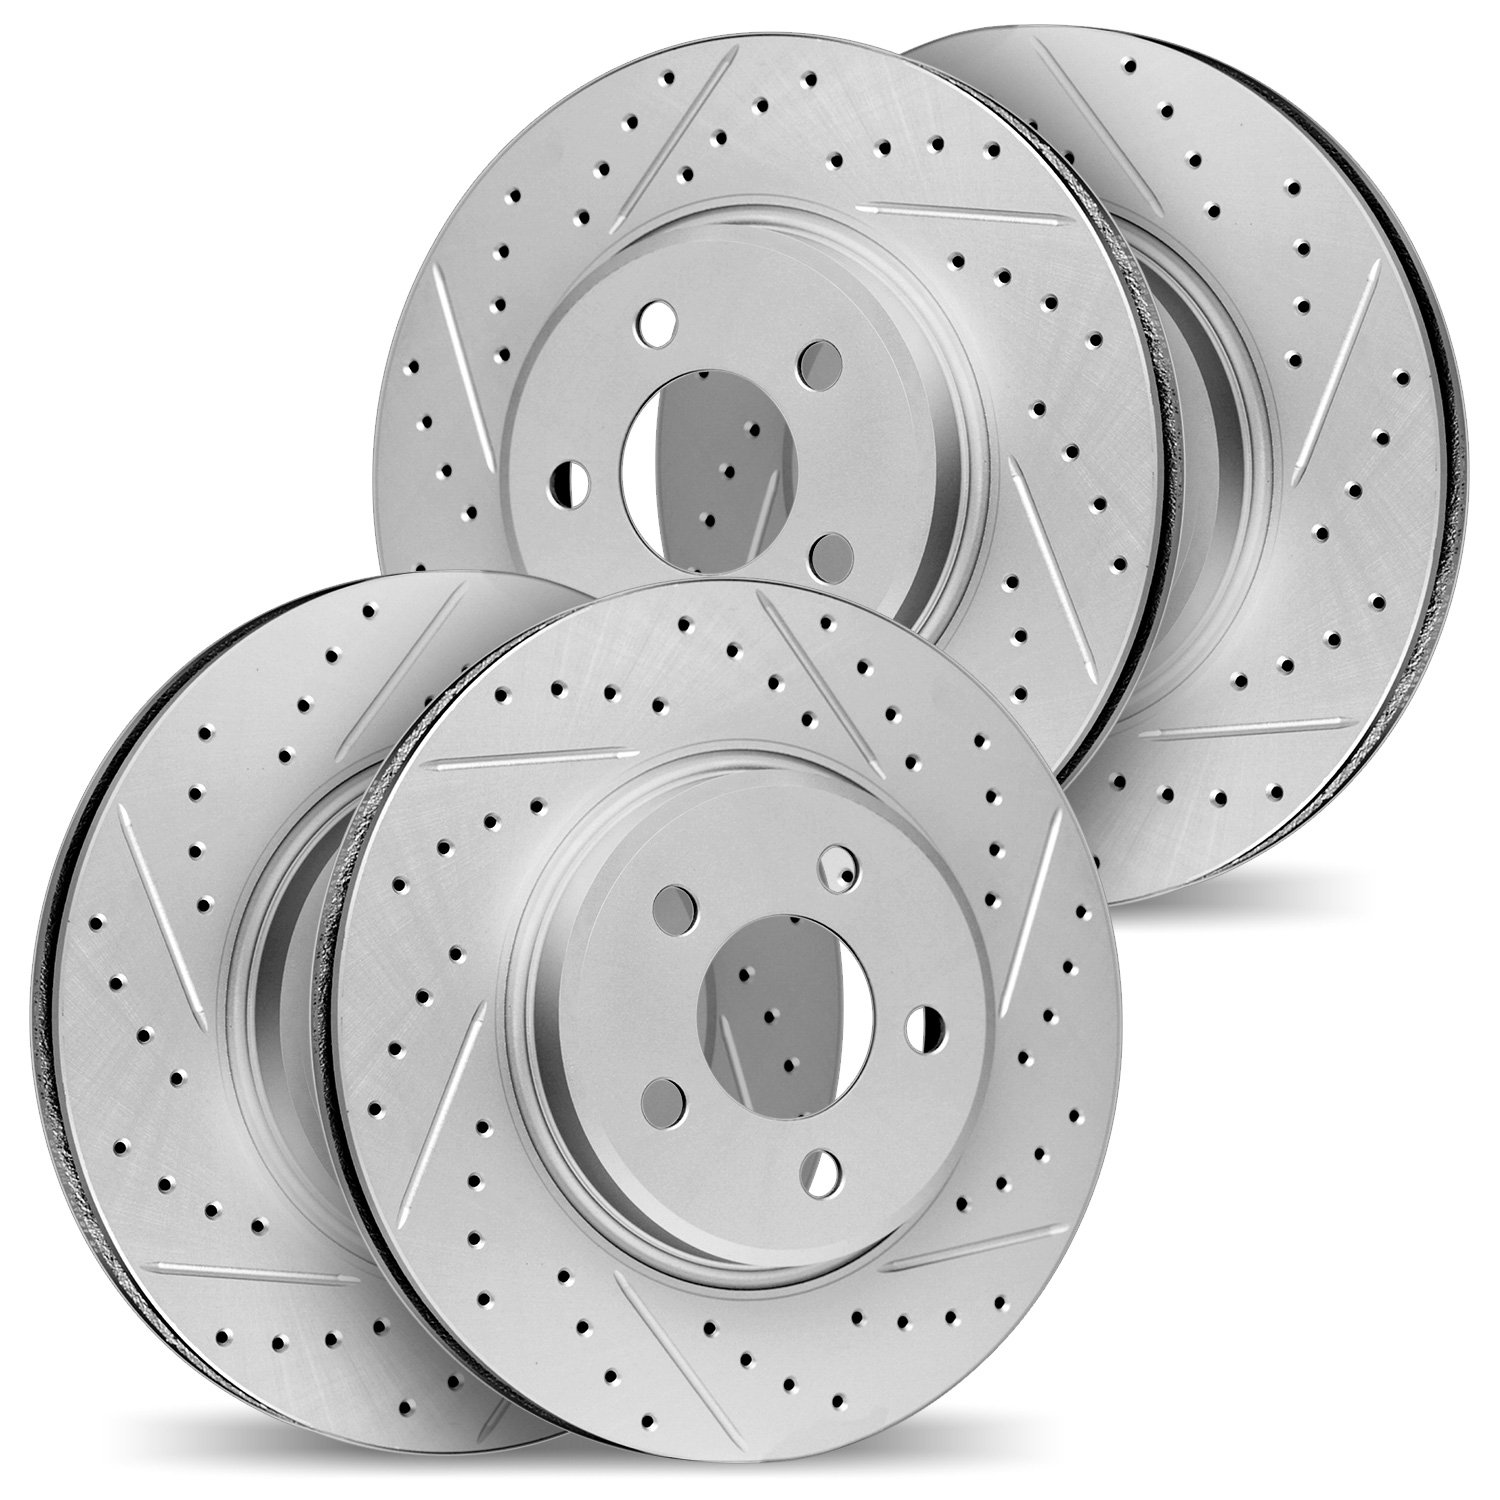 2004-31014 Geoperformance Drilled/Slotted Brake Rotors, 2006-2007 BMW, Position: Front and Rear